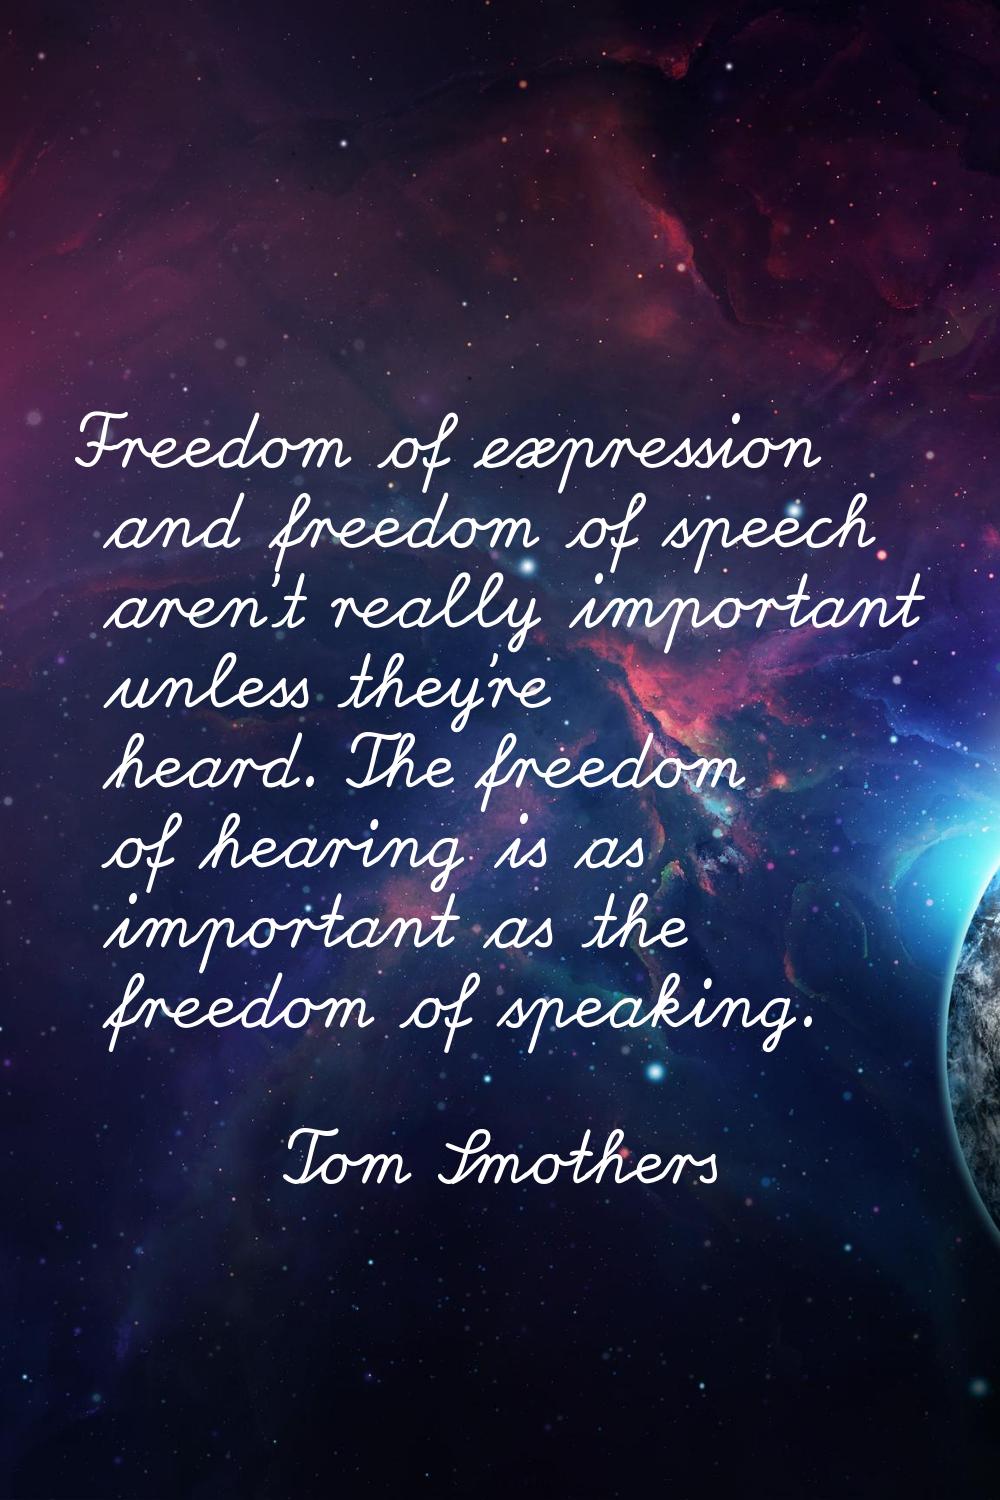 Freedom of expression and freedom of speech aren't really important unless they're heard. The freed